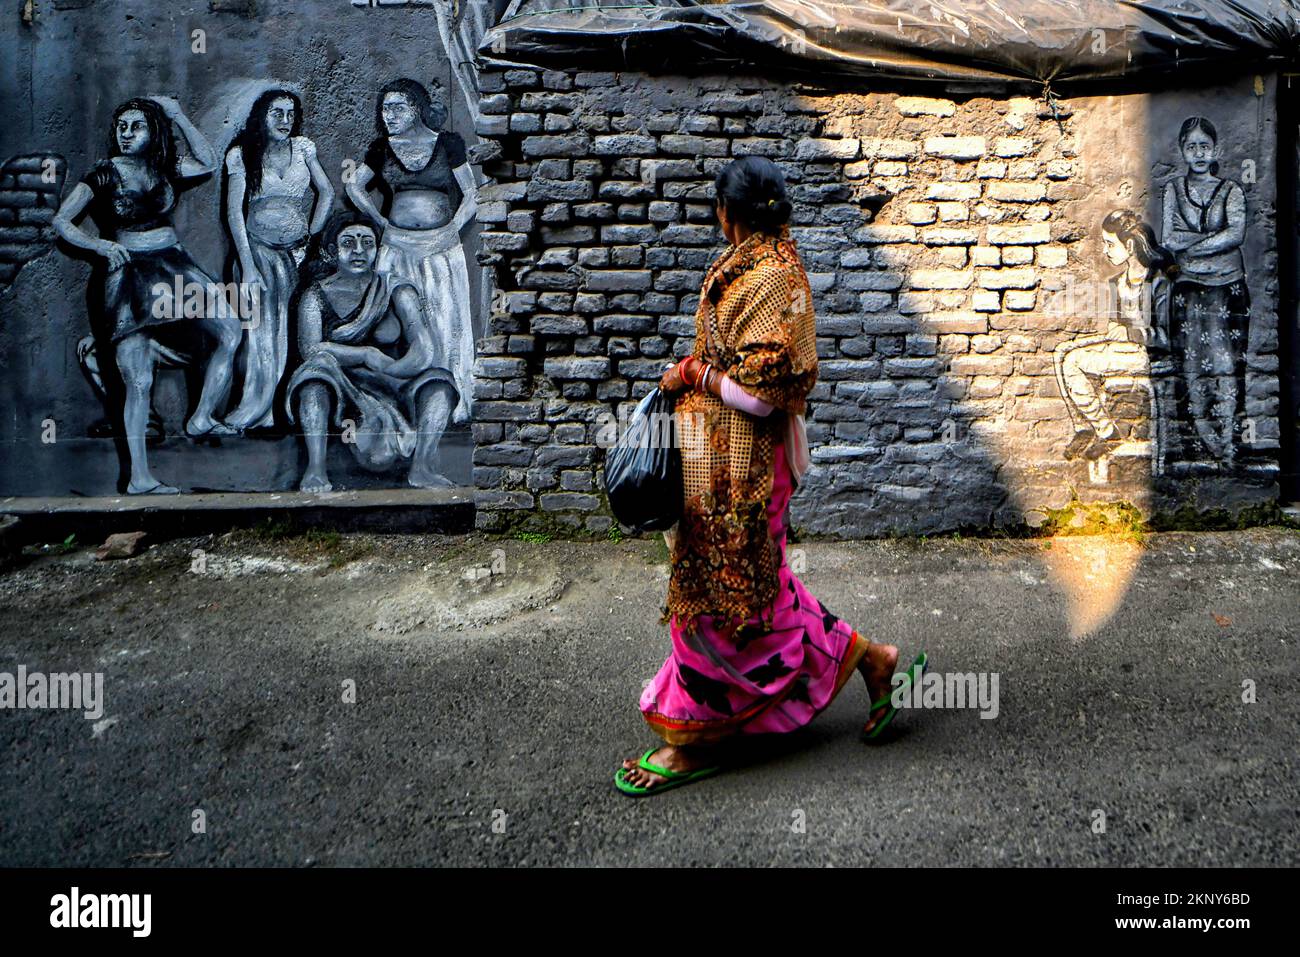 Kolkata, India. 26th Nov, 2022. A woman walks past graffiti mural artwork on a wall. Kolkata Streets and different slums seen getting painted with colorful graffiti as an initiative by a Football Club (Milan Sangha) in Kolkata. Artists from different Art colleges have participated to make the city more beautiful. Credit: SOPA Images Limited/Alamy Live News Stock Photo